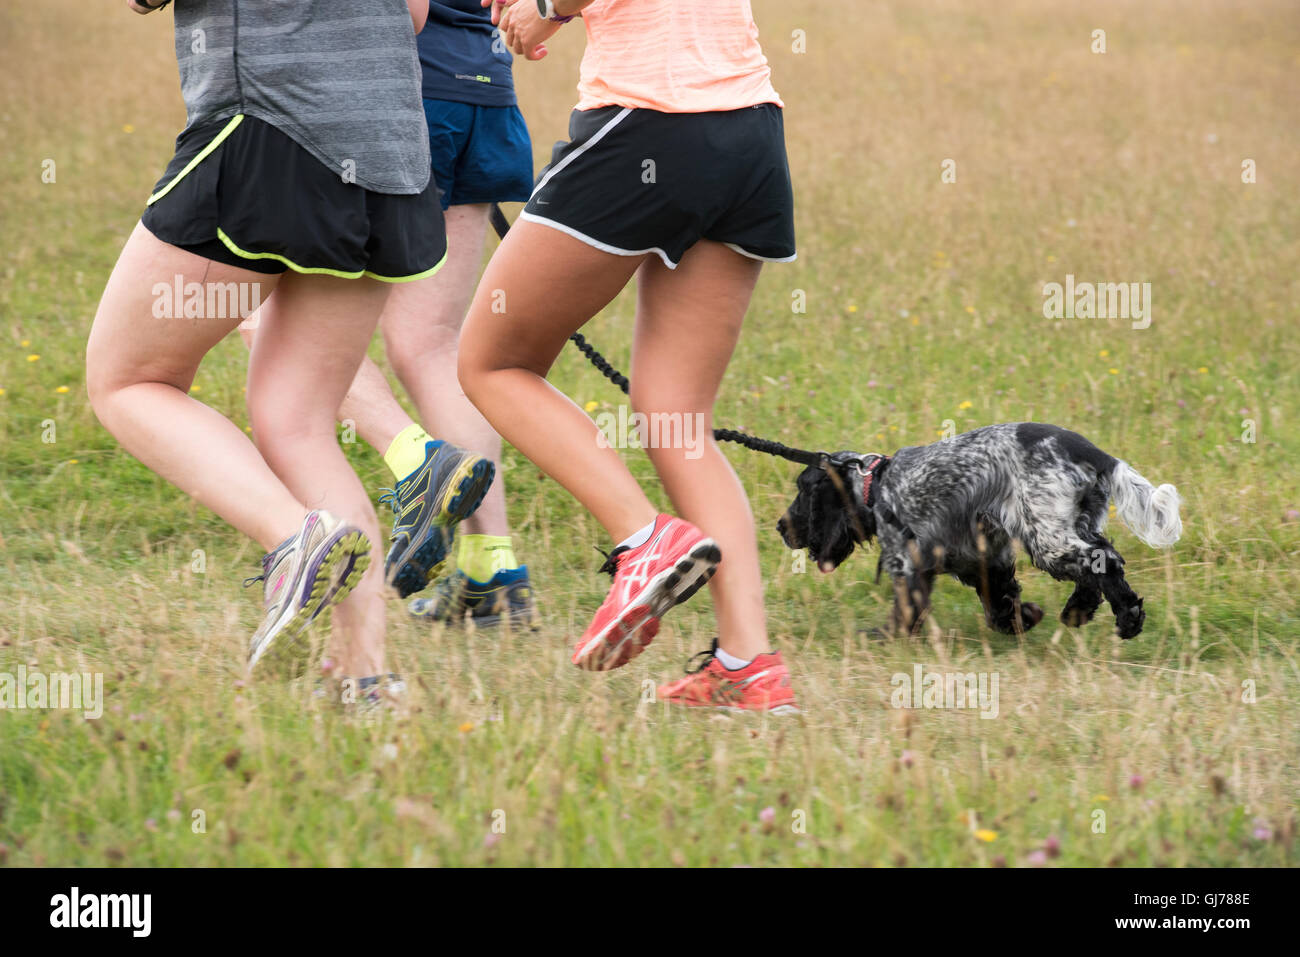 runners and dog Stock Photo